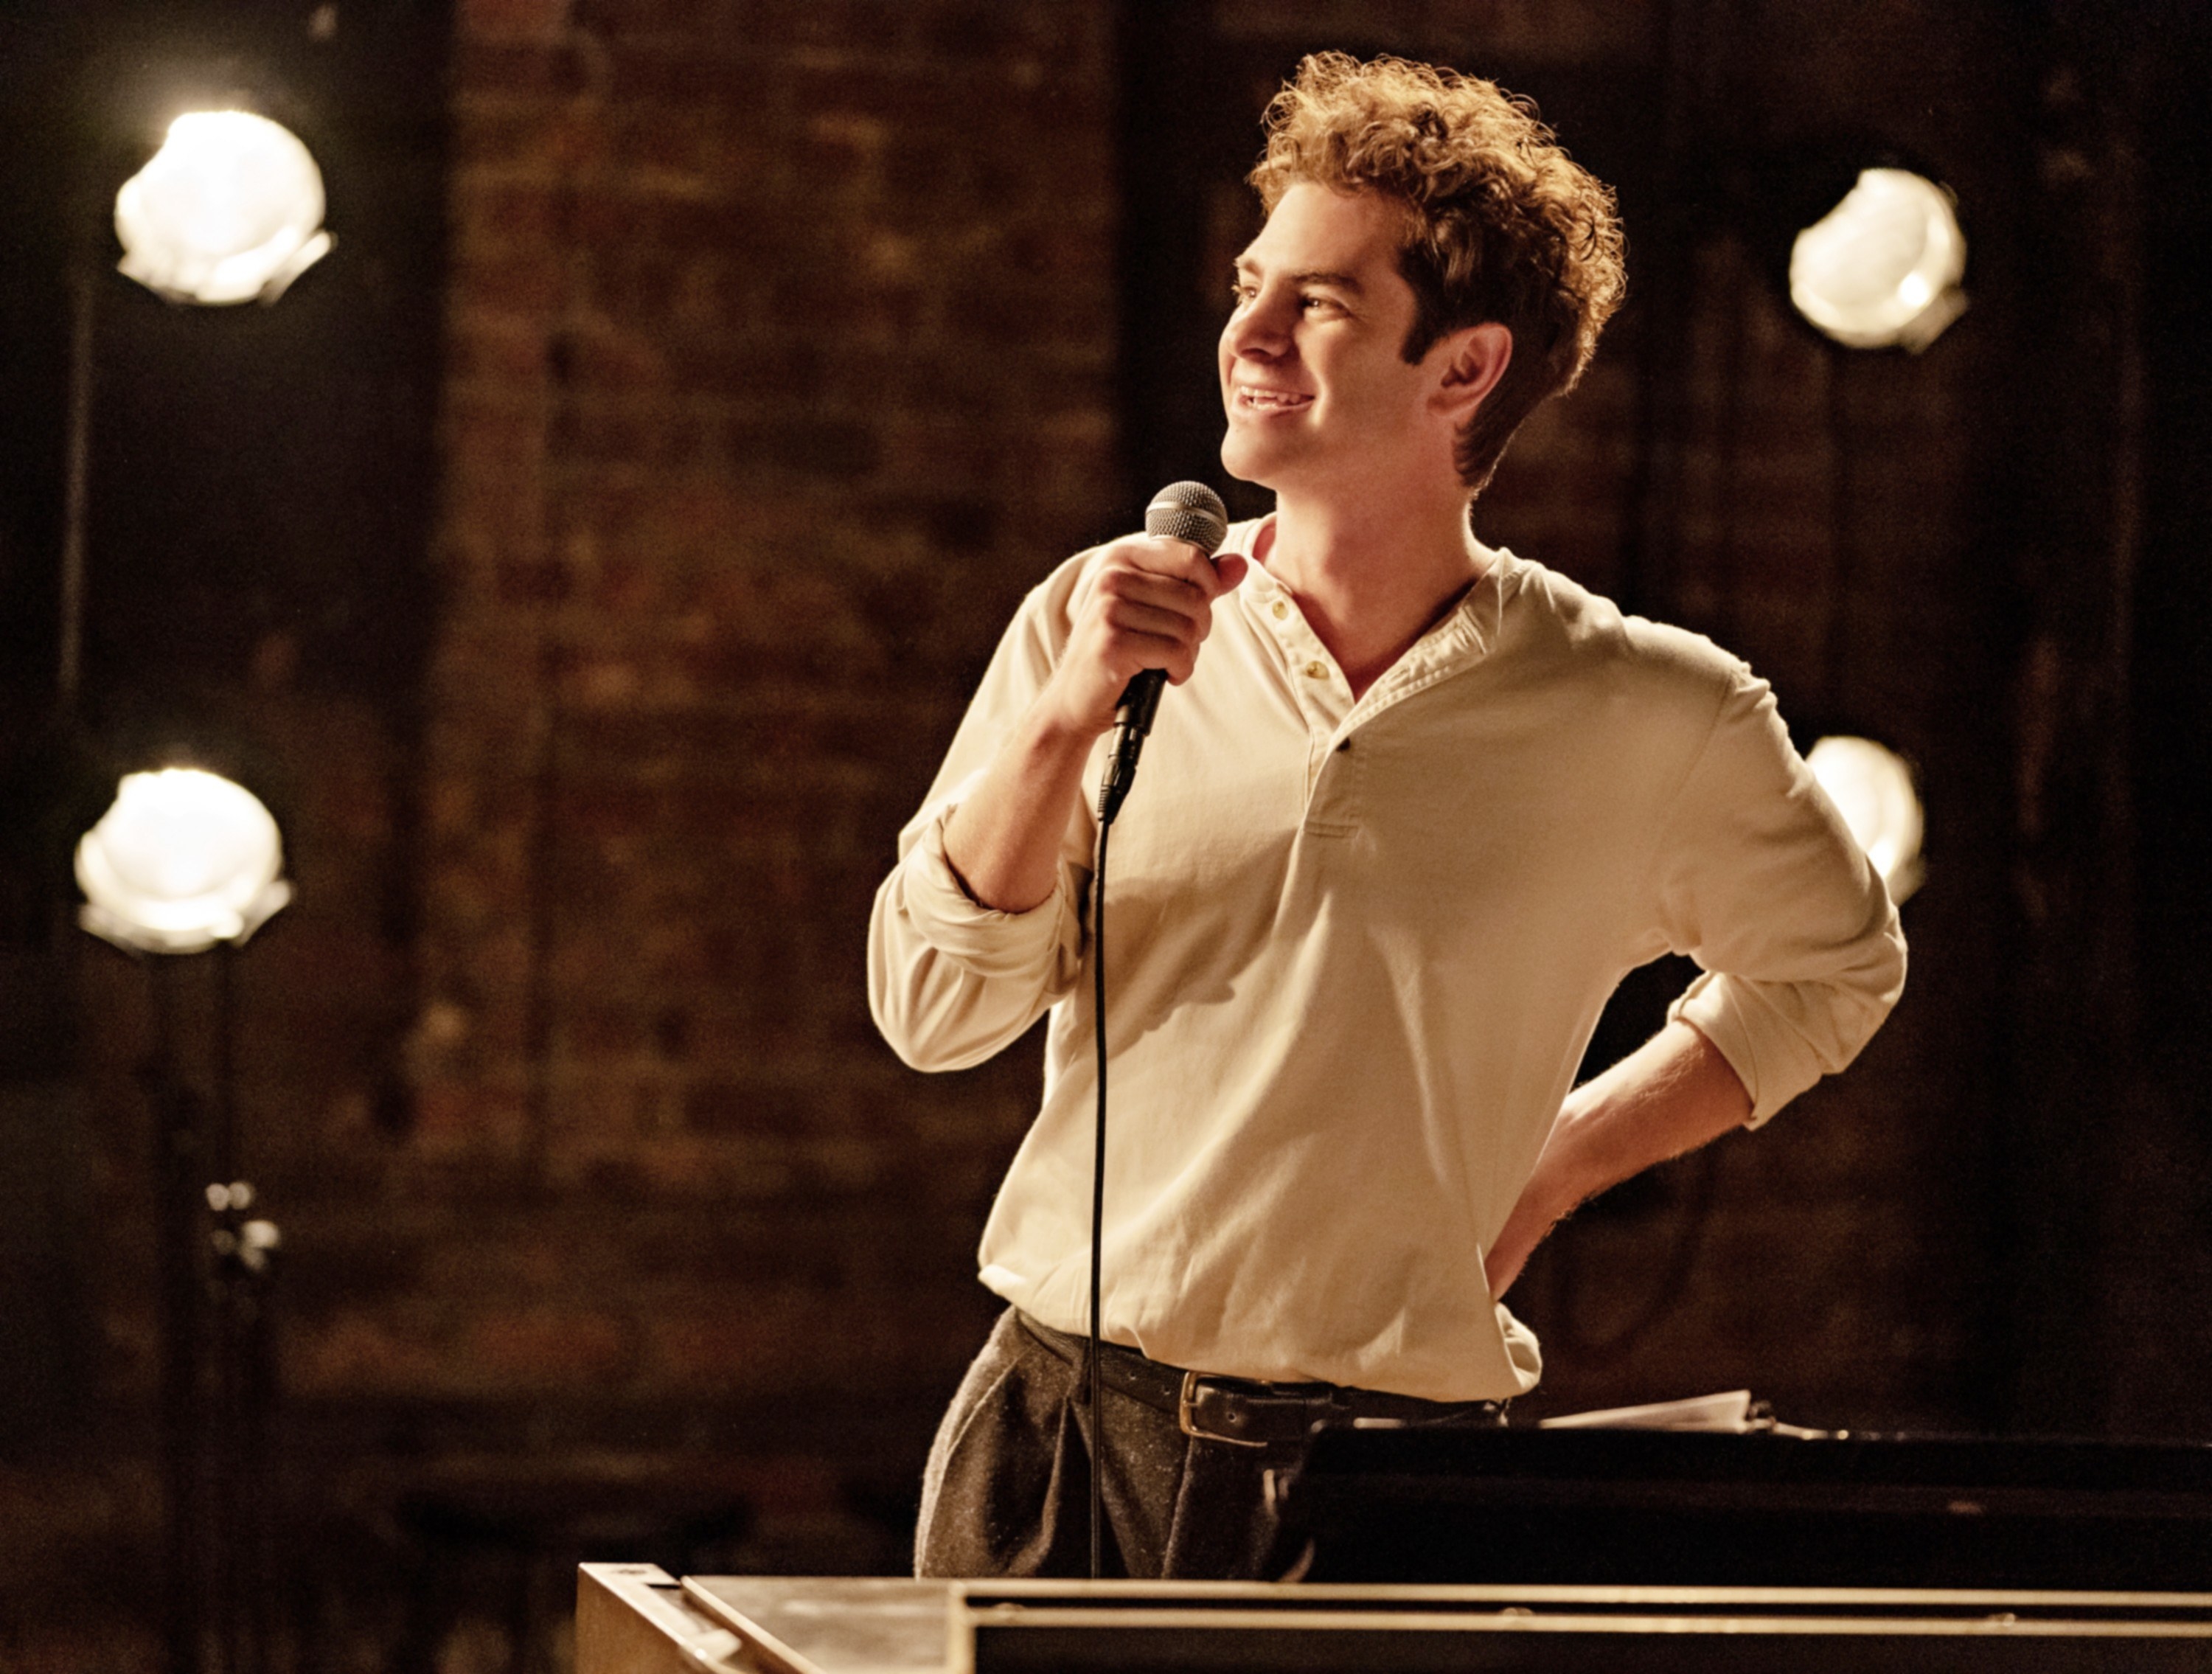 Andrew holding a mic and smiling in a scene from the film Tick, Tick...Boom!